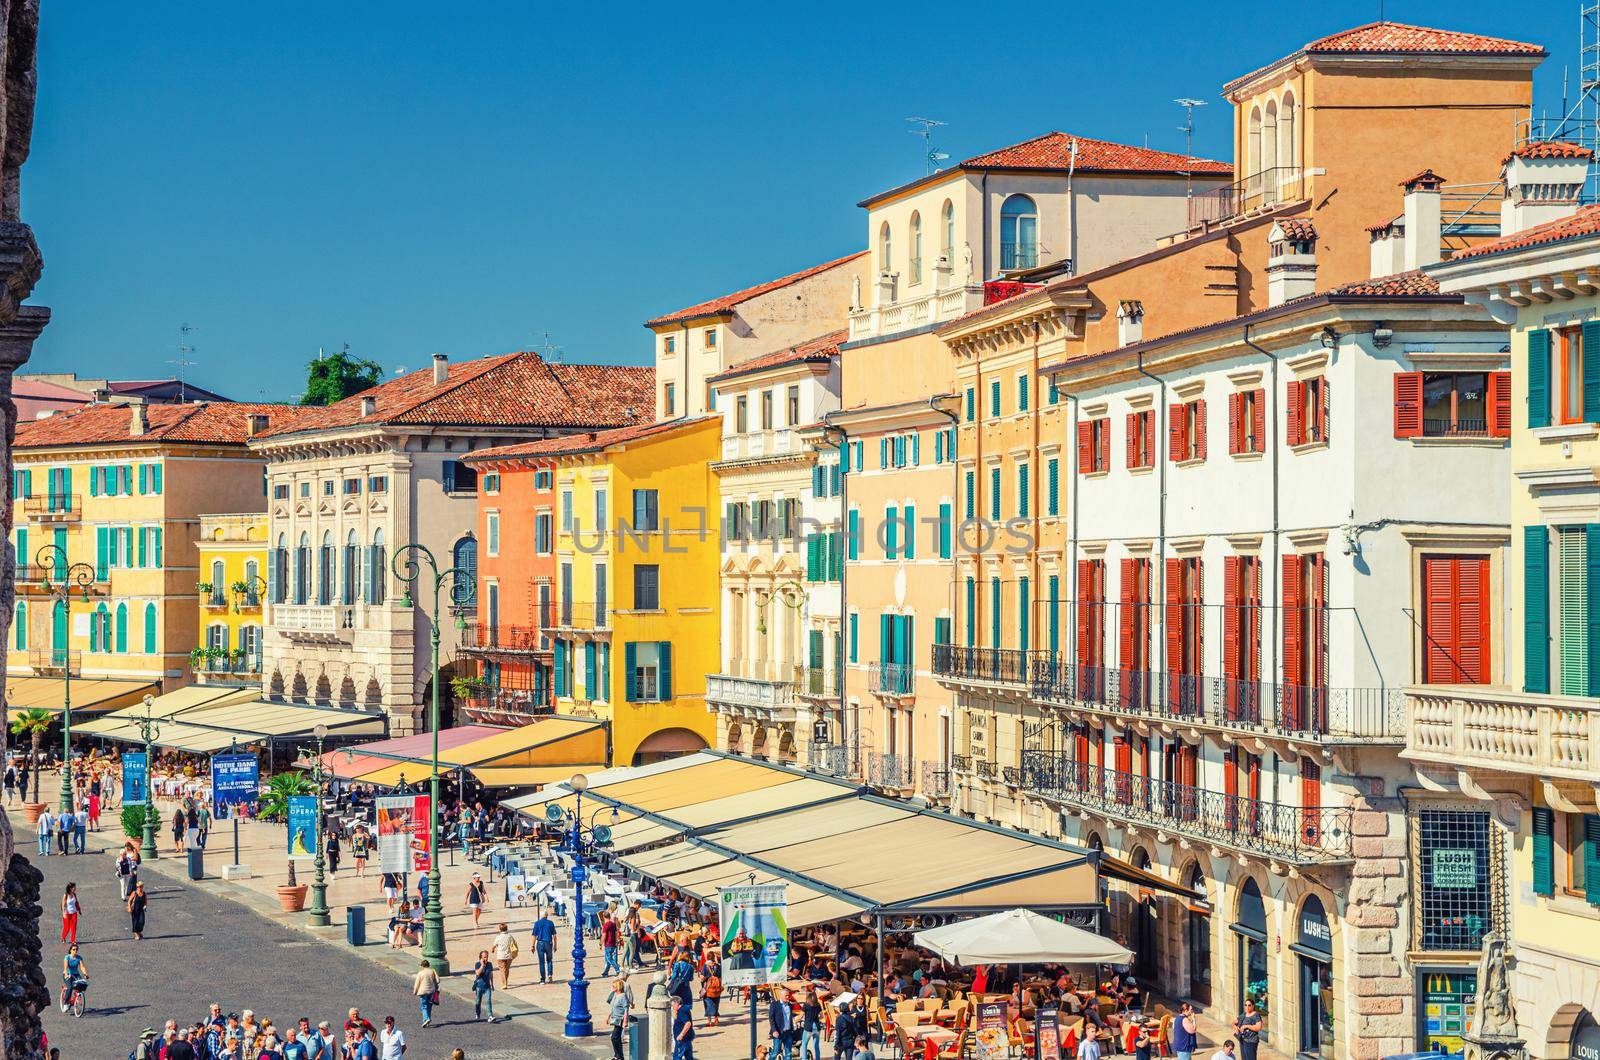 Verona, Italy, September 12, 2019: Row of old colorful multicolored buildings on Piazza Bra square in historical city centre, cafes and restaurants with tents and walking tourists, aerial view